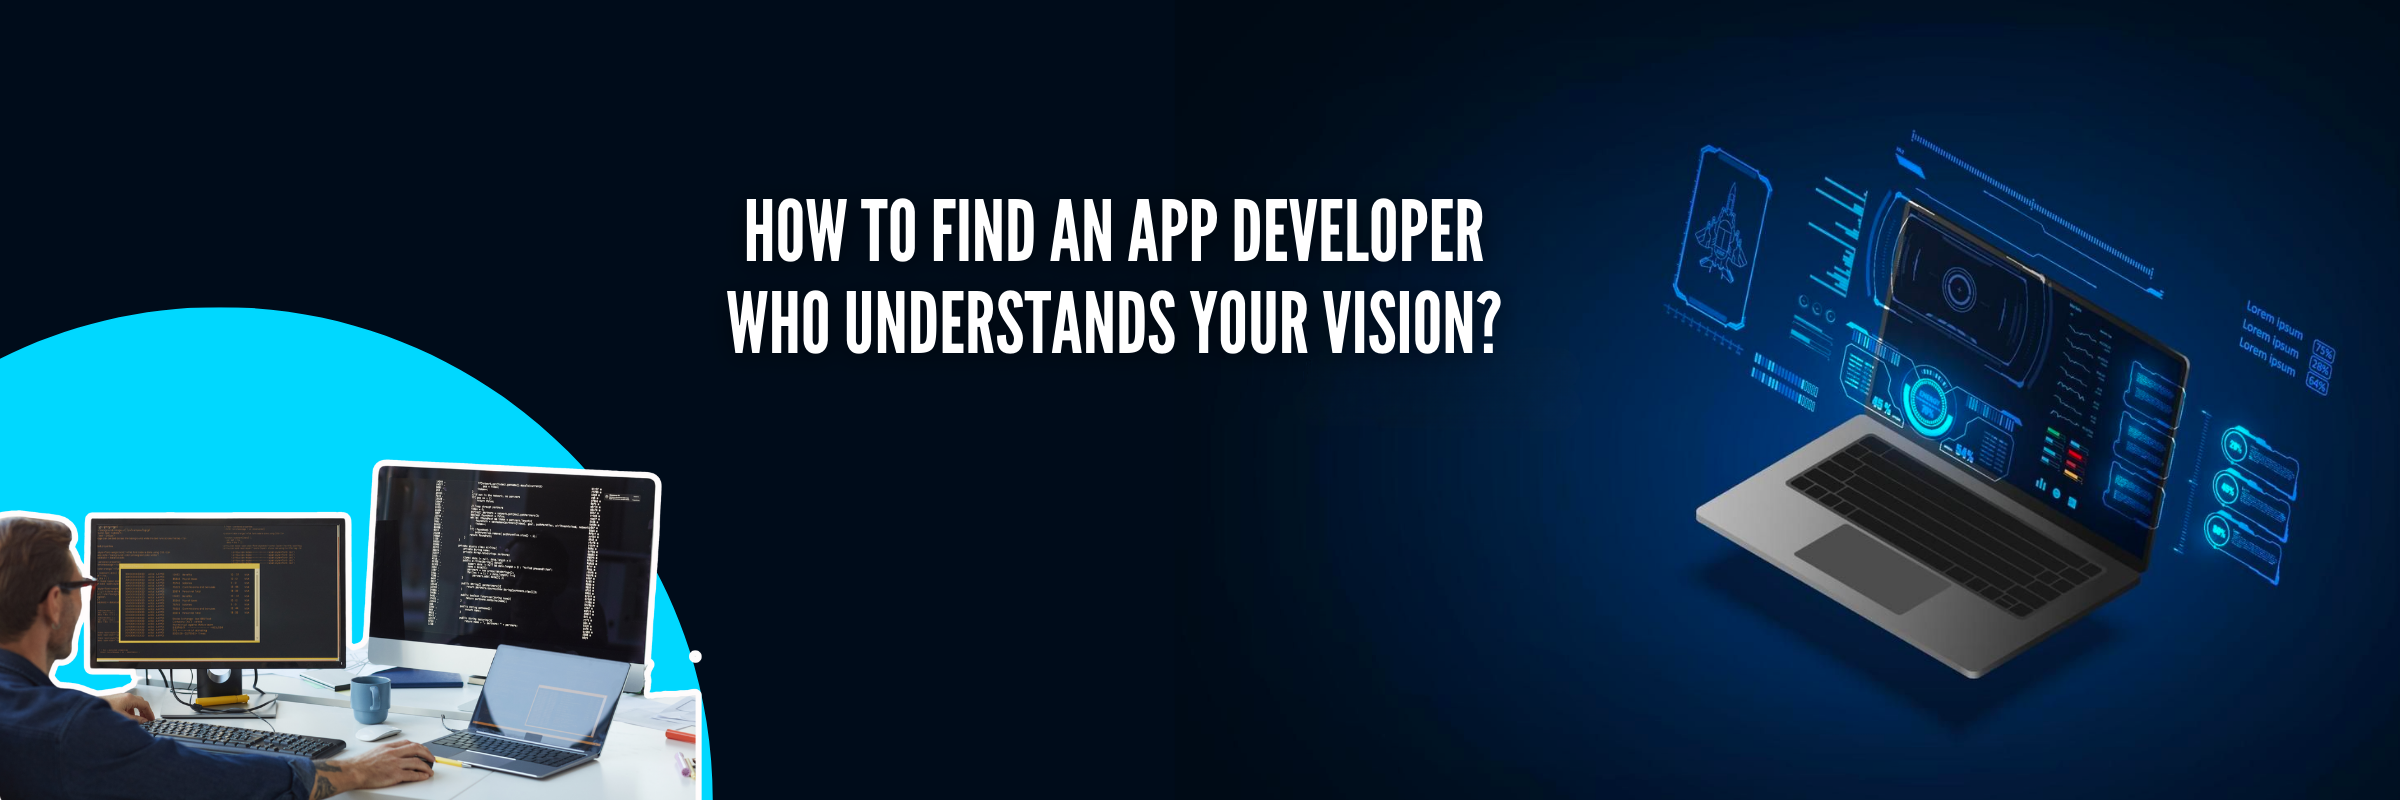 How to Find an App Developer Who Understands Your Vision?